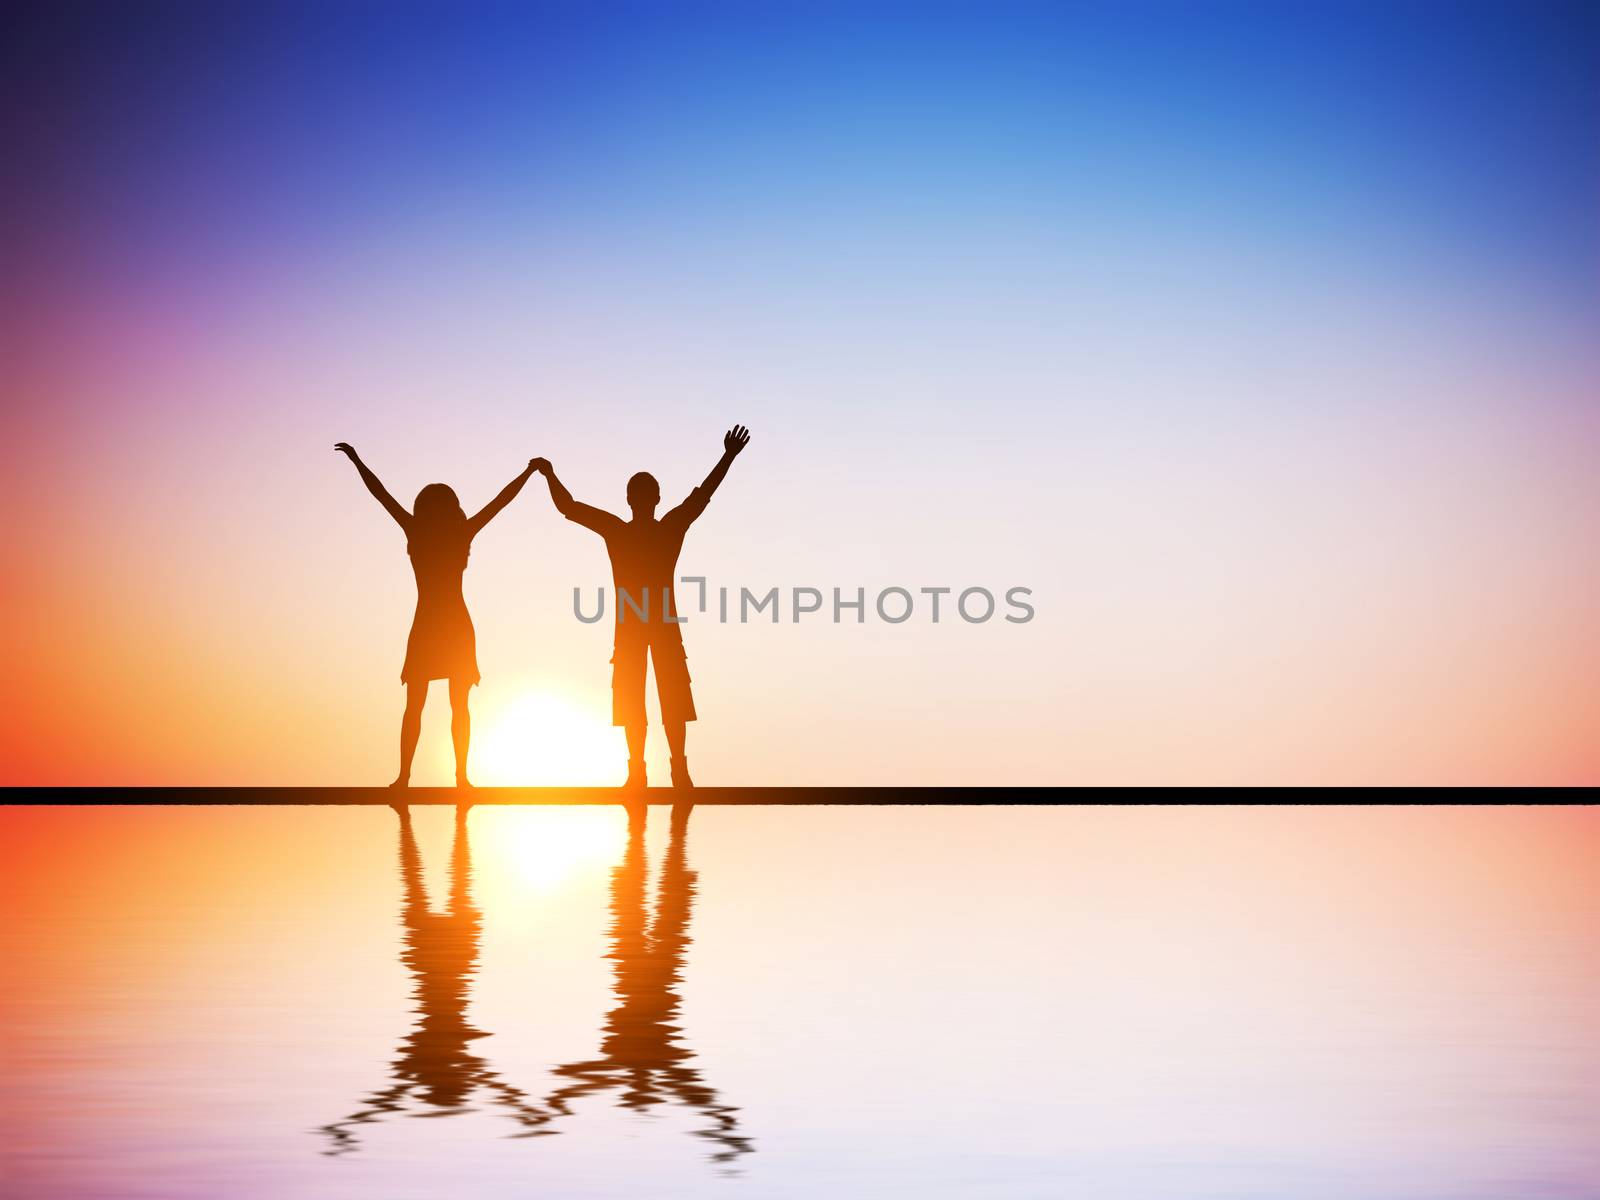 A happy couple in love standing together with hands raised at sunset with water reflection